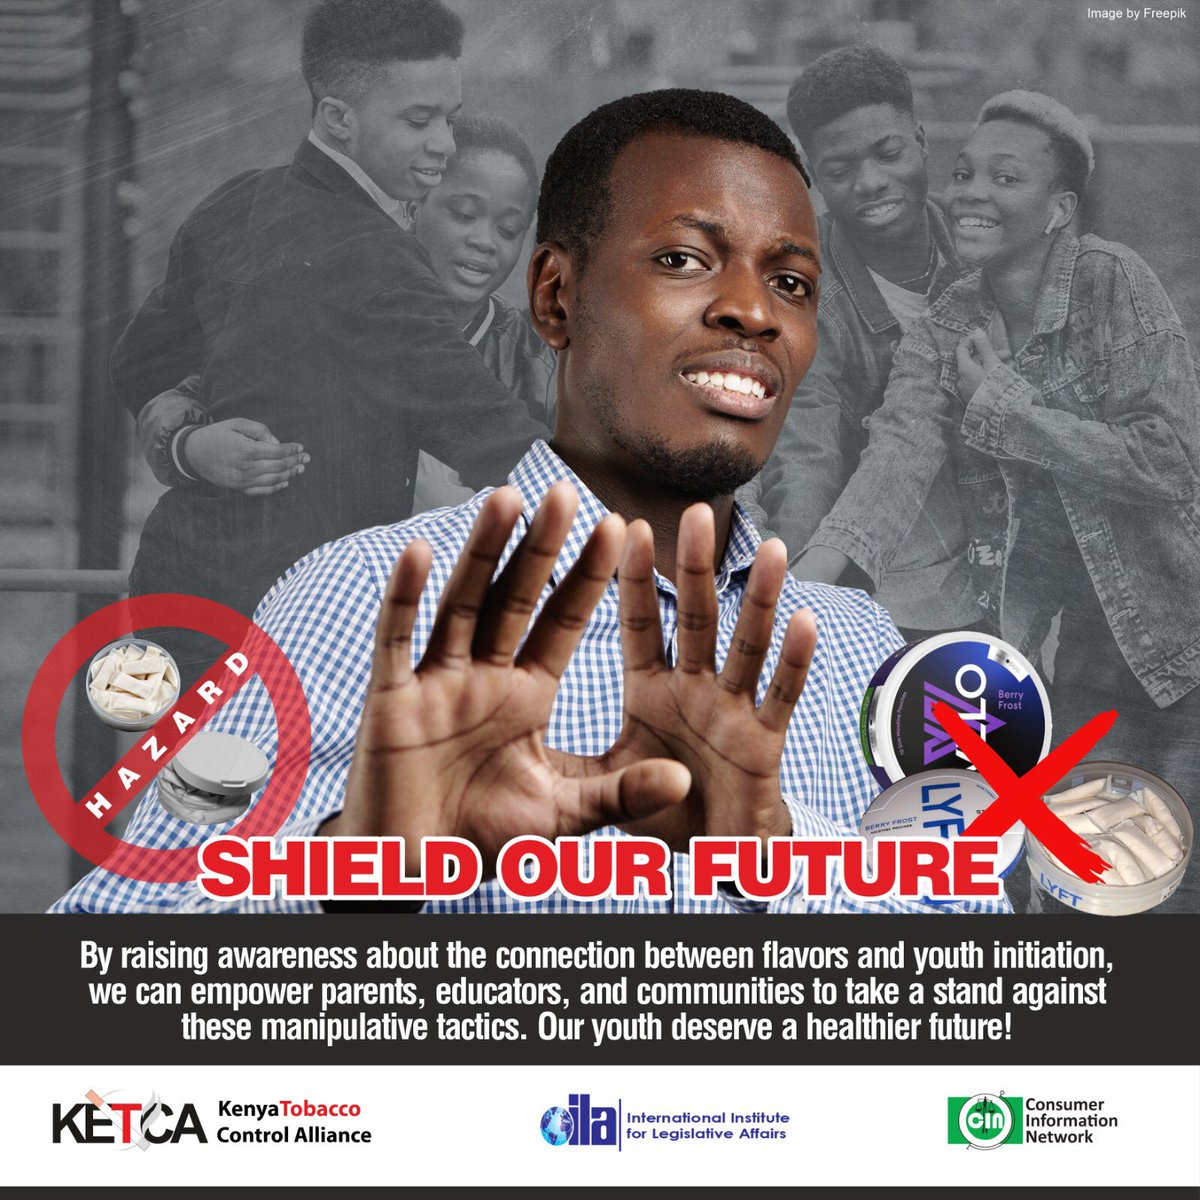 We urge everyone especially young people to say #NoToNicotinePouchesKE to secure their health and futures. Tobacco companies are keenly skimming to attract a new generation of #tobacco users.

#TobaccoFreeKE #NoToNicotinePouches
#StopNicotinePouchesKE 

@IILAinfo @IILAinfo @DFHRC